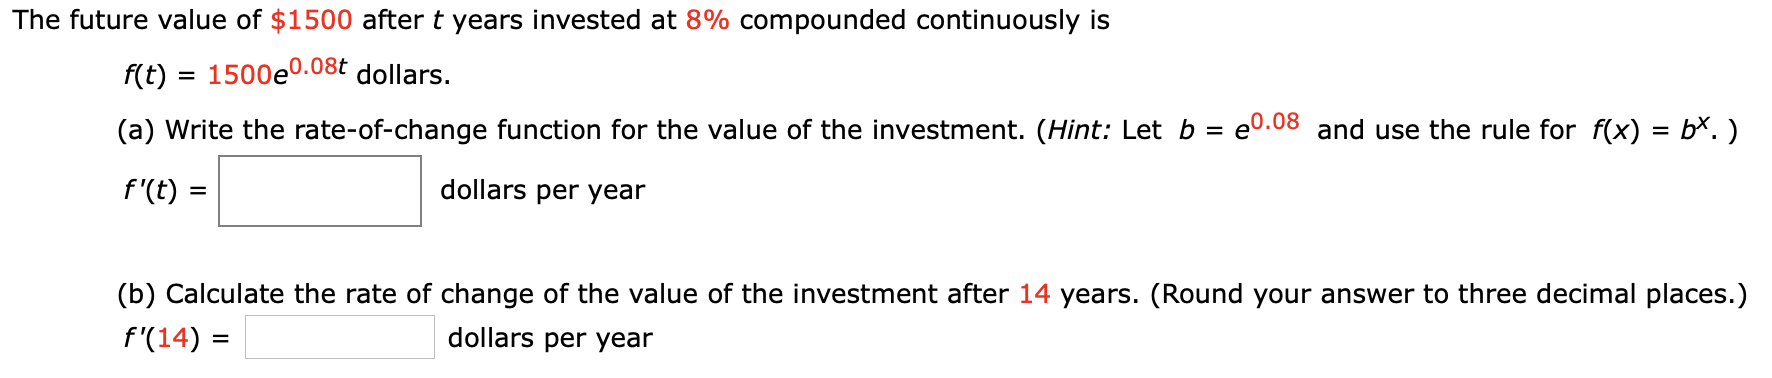 The future value of $1500 after t years invested at 8% compounded continuously is
f(t)1500e0.08t dollars.
e0.08 and use the rule for f(x) = b*.)
(a) Write the rate-of-change function for the value of the investment. (Hint: Let b
dollars per year
f'(t)
=
(b) Calculate the rate of change of the value of the investment after 14 years. (Round your answer to three decimal places.)
dollars per year
f'(14)
